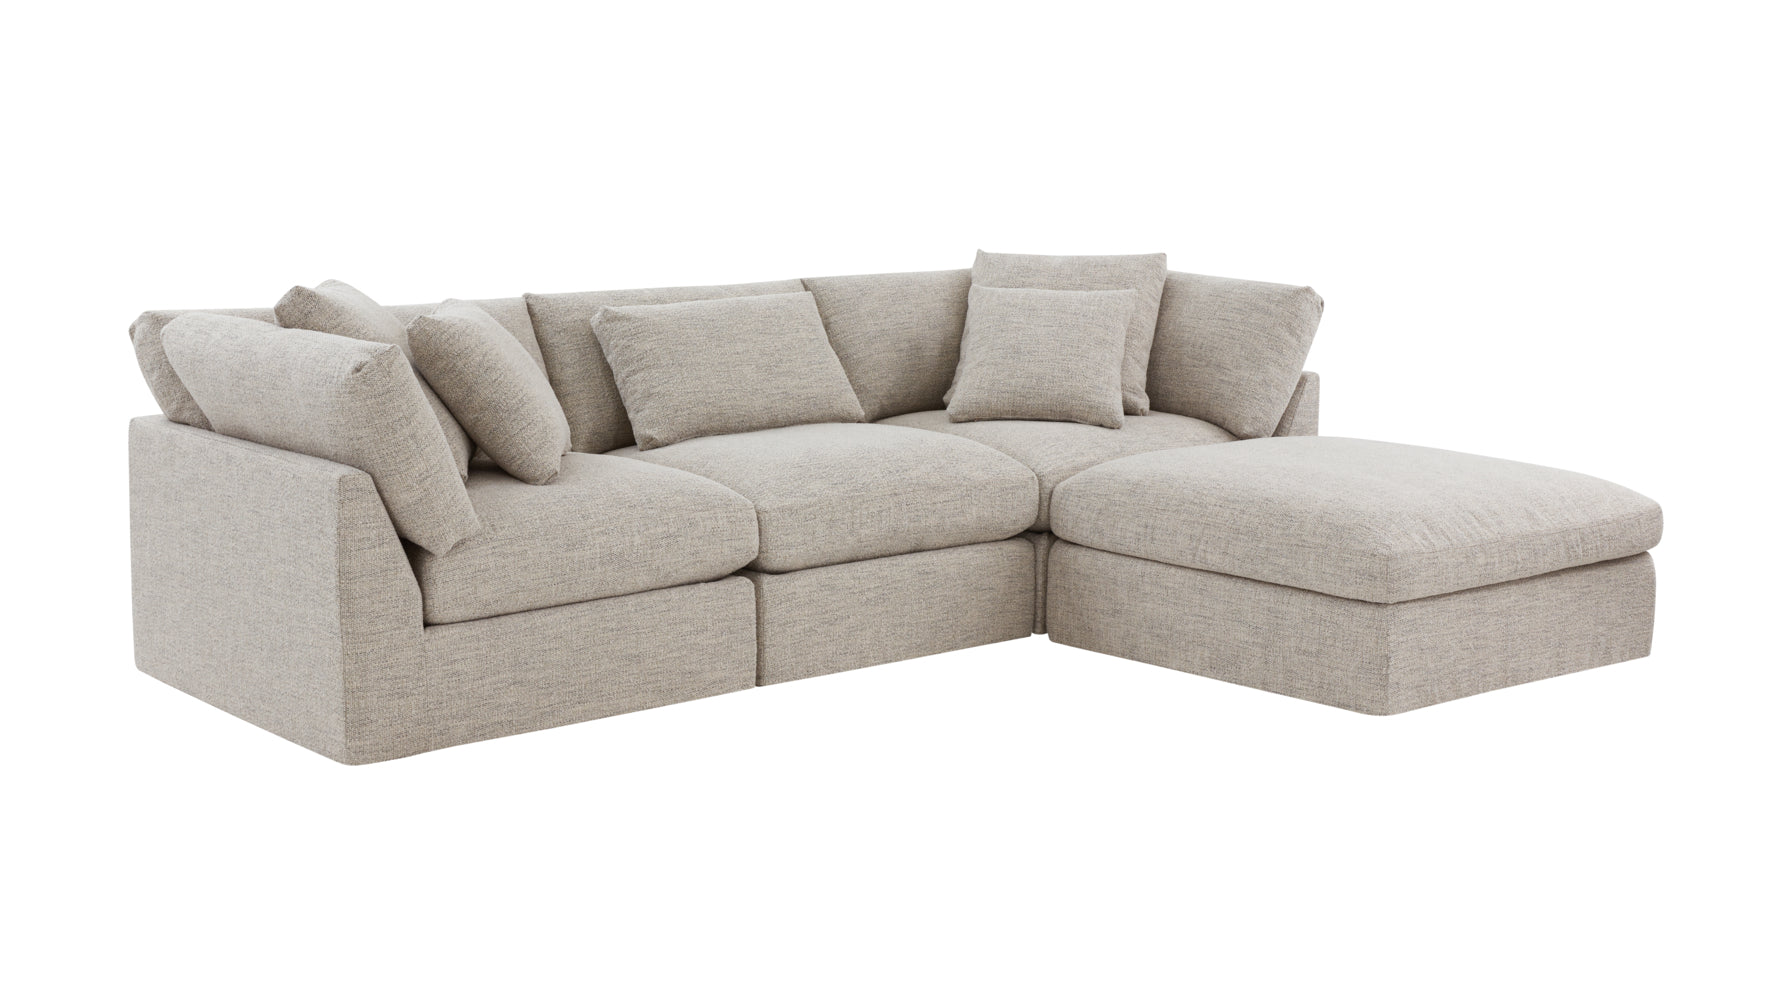 Get Together™ 4-Piece Modular Sectional, Large, Oatmeal - Image 3